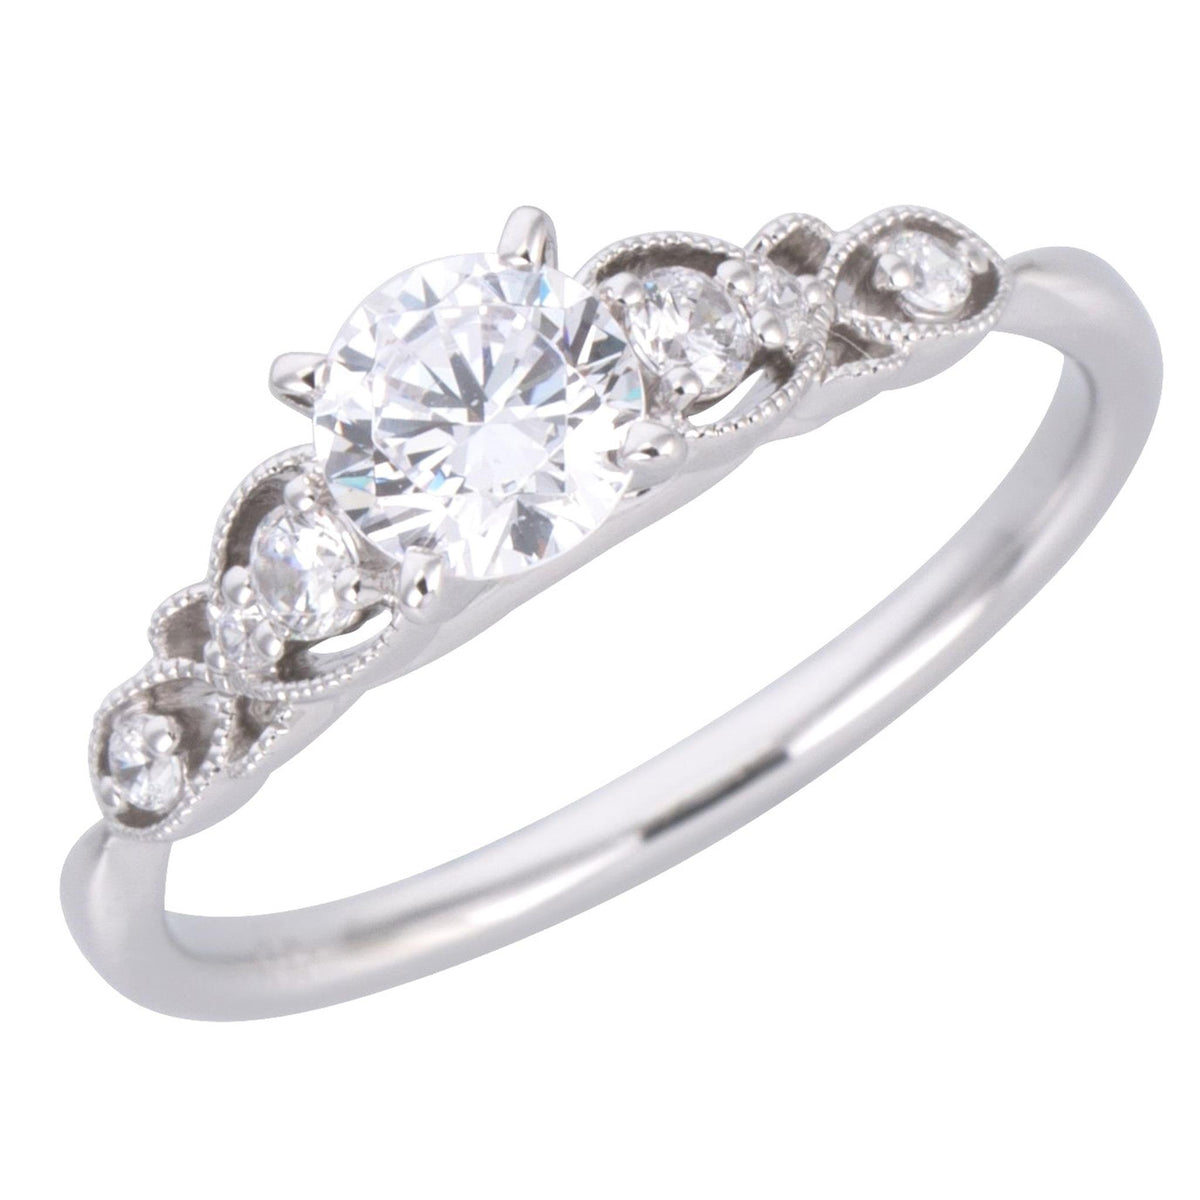 18Kt White Gold Vintage Inspired Engagement Ring Mounting With 0.13cttw Natural Diamonds